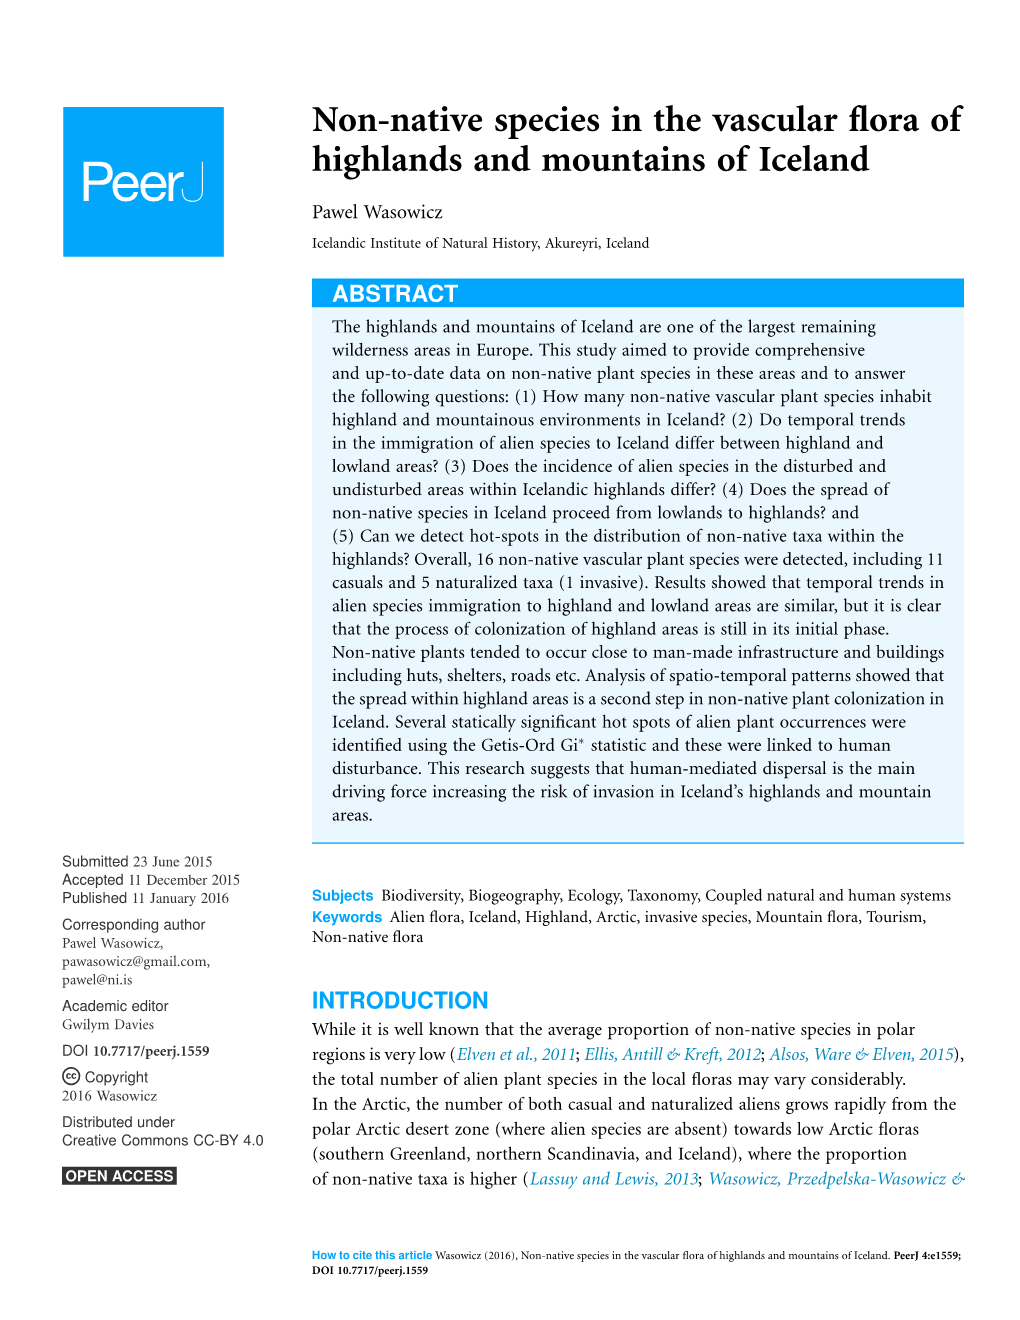 Non-Native Species in the Vascular Flora of Highlands and Mountains Of